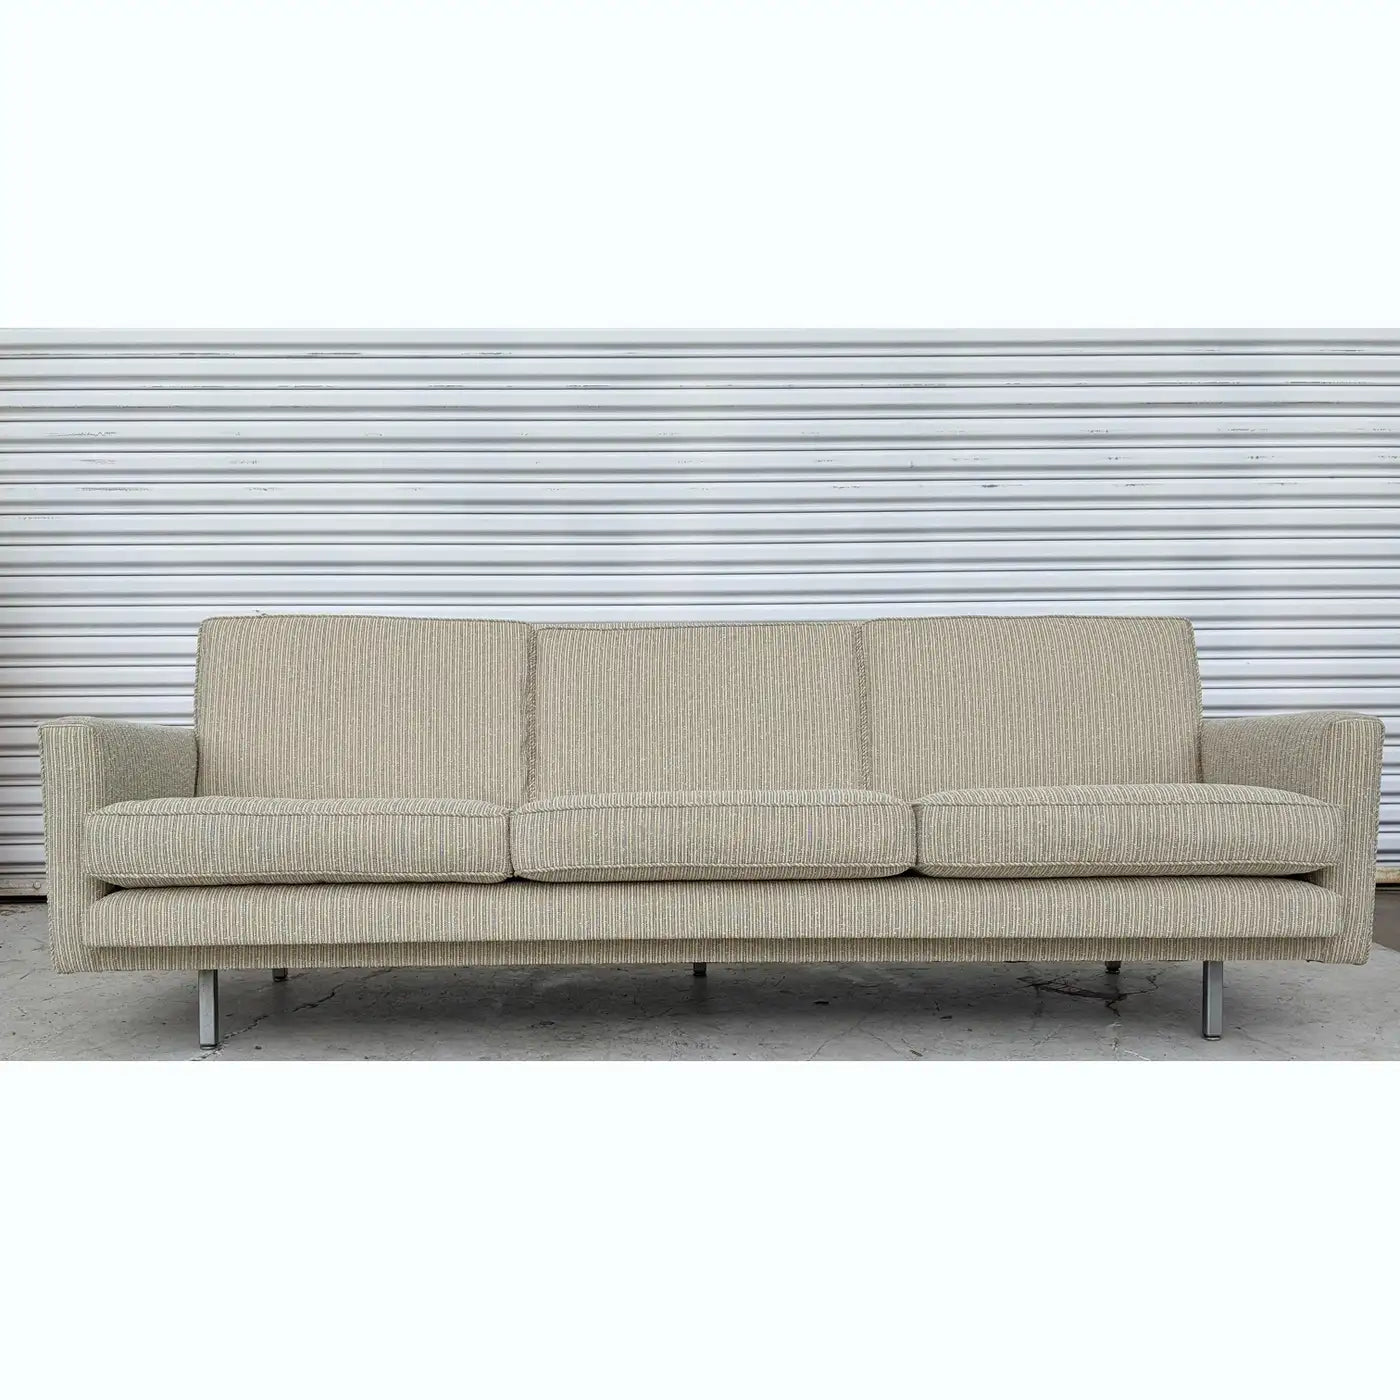 Sofa designed by George Nelson